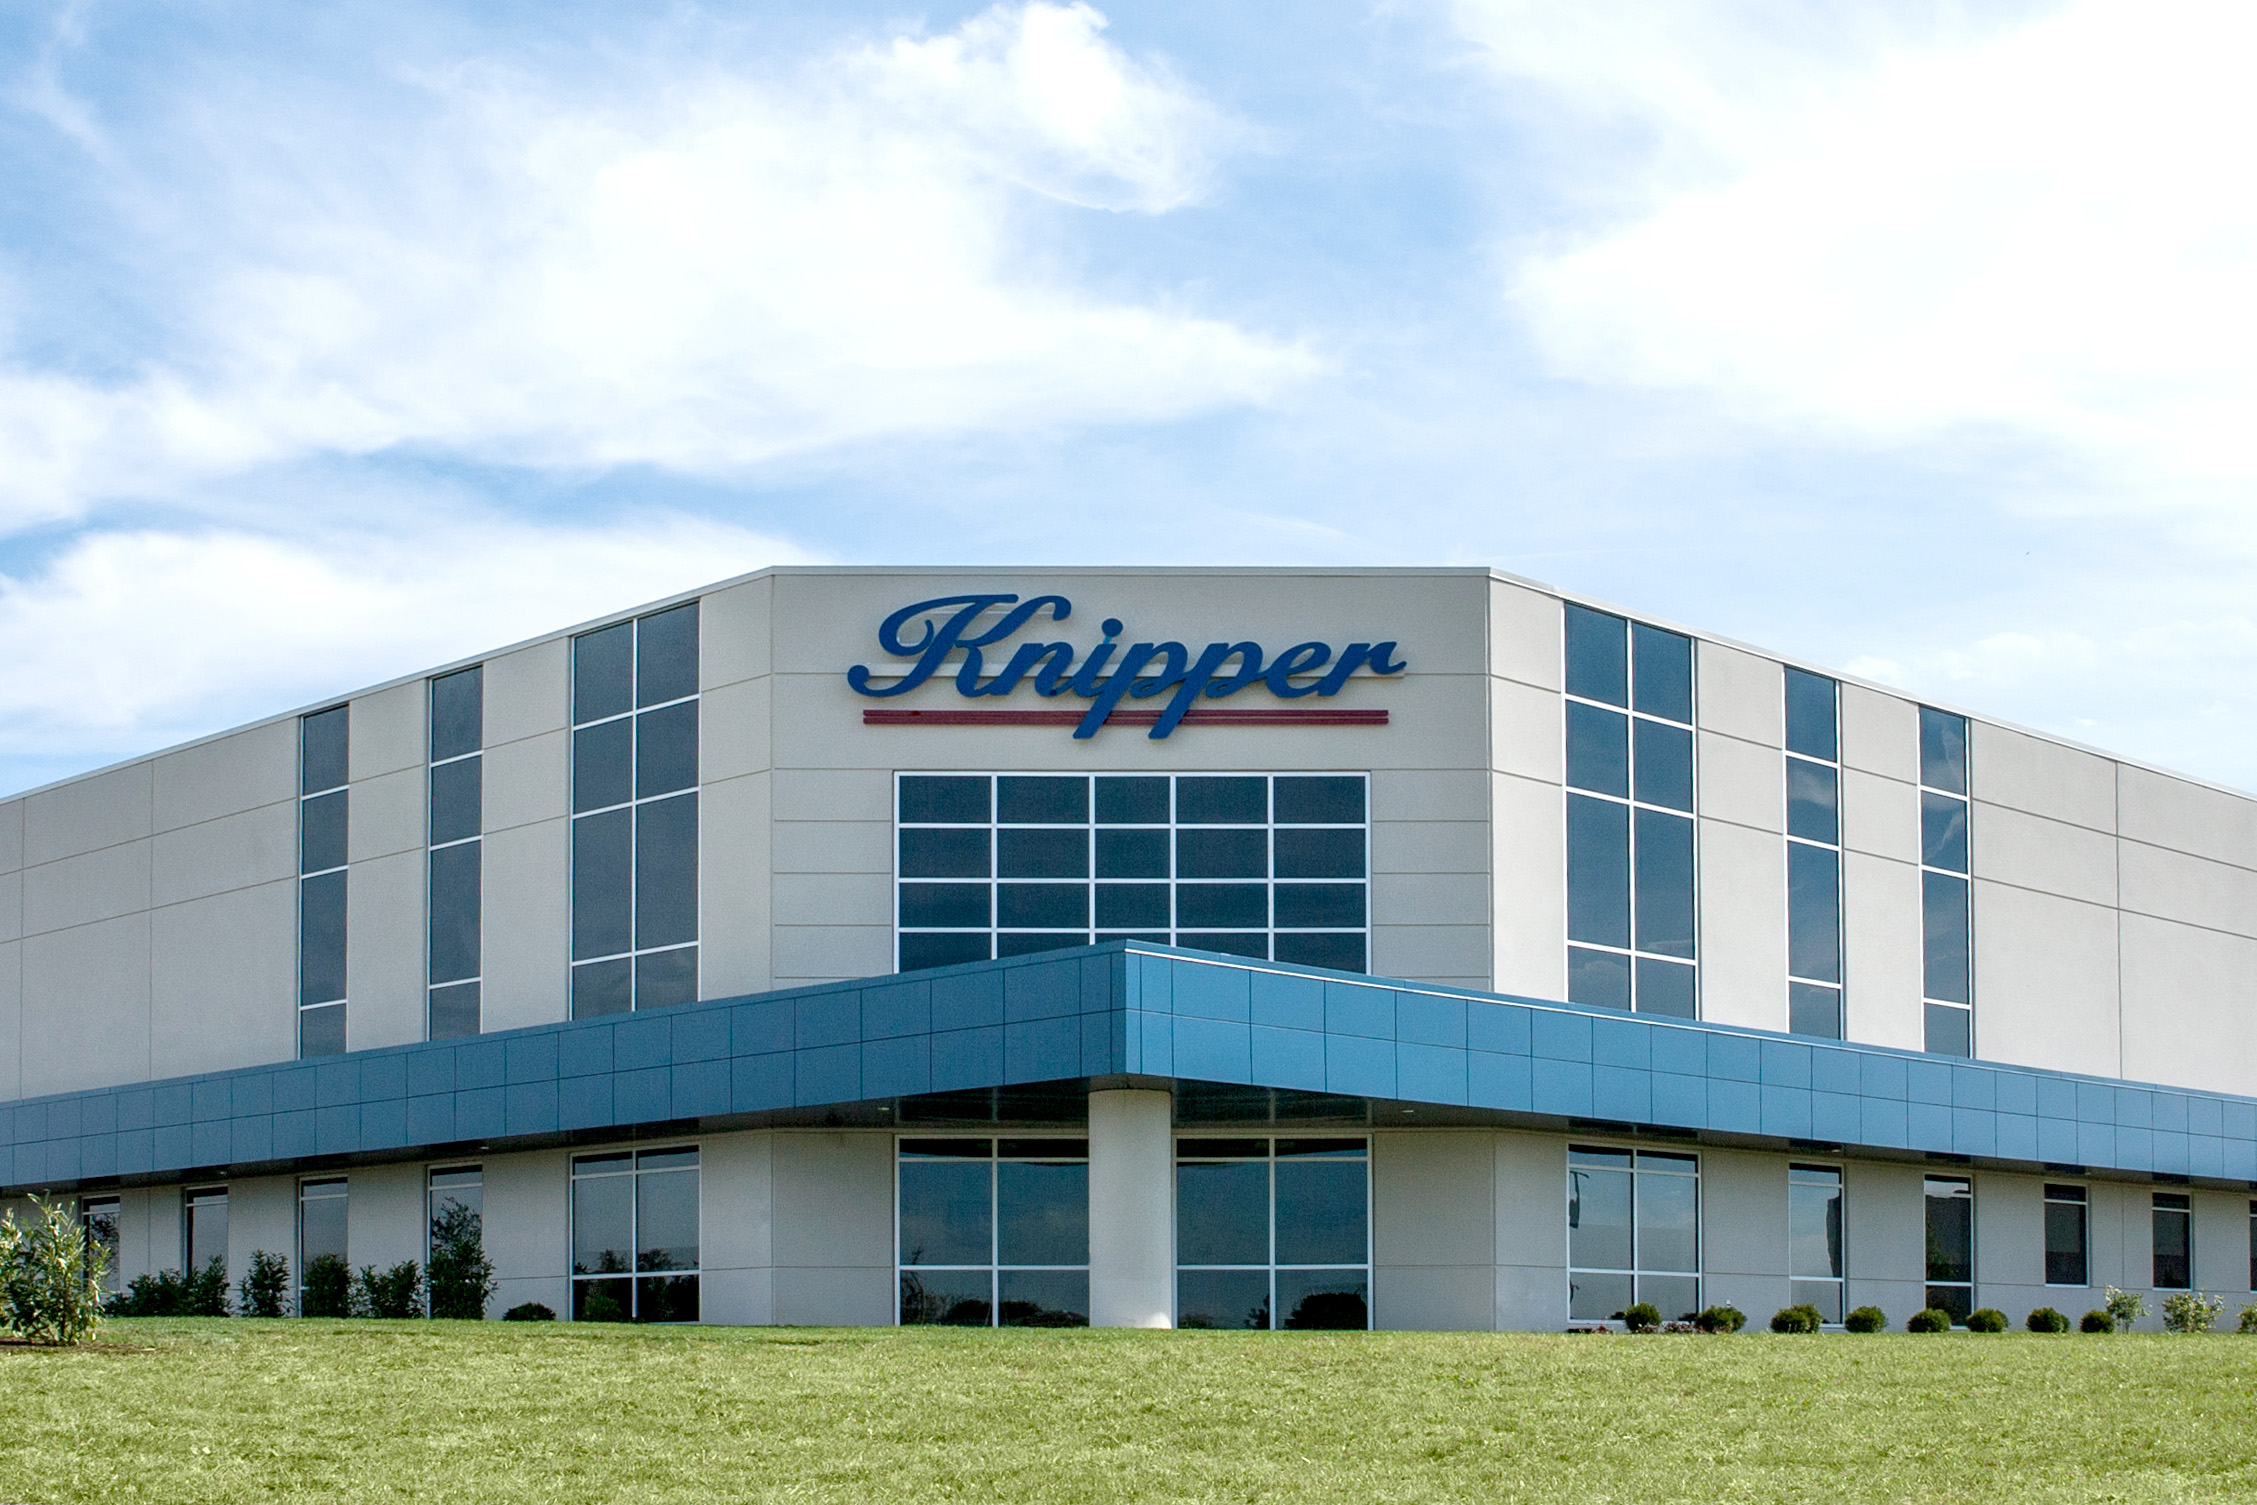 Located between Charlestown and Jeffersonville, Ind., Knipper’s facility is situated in the River Ridge Commerce Center, a world-class 6,000-acre business and manufacturing park under development.